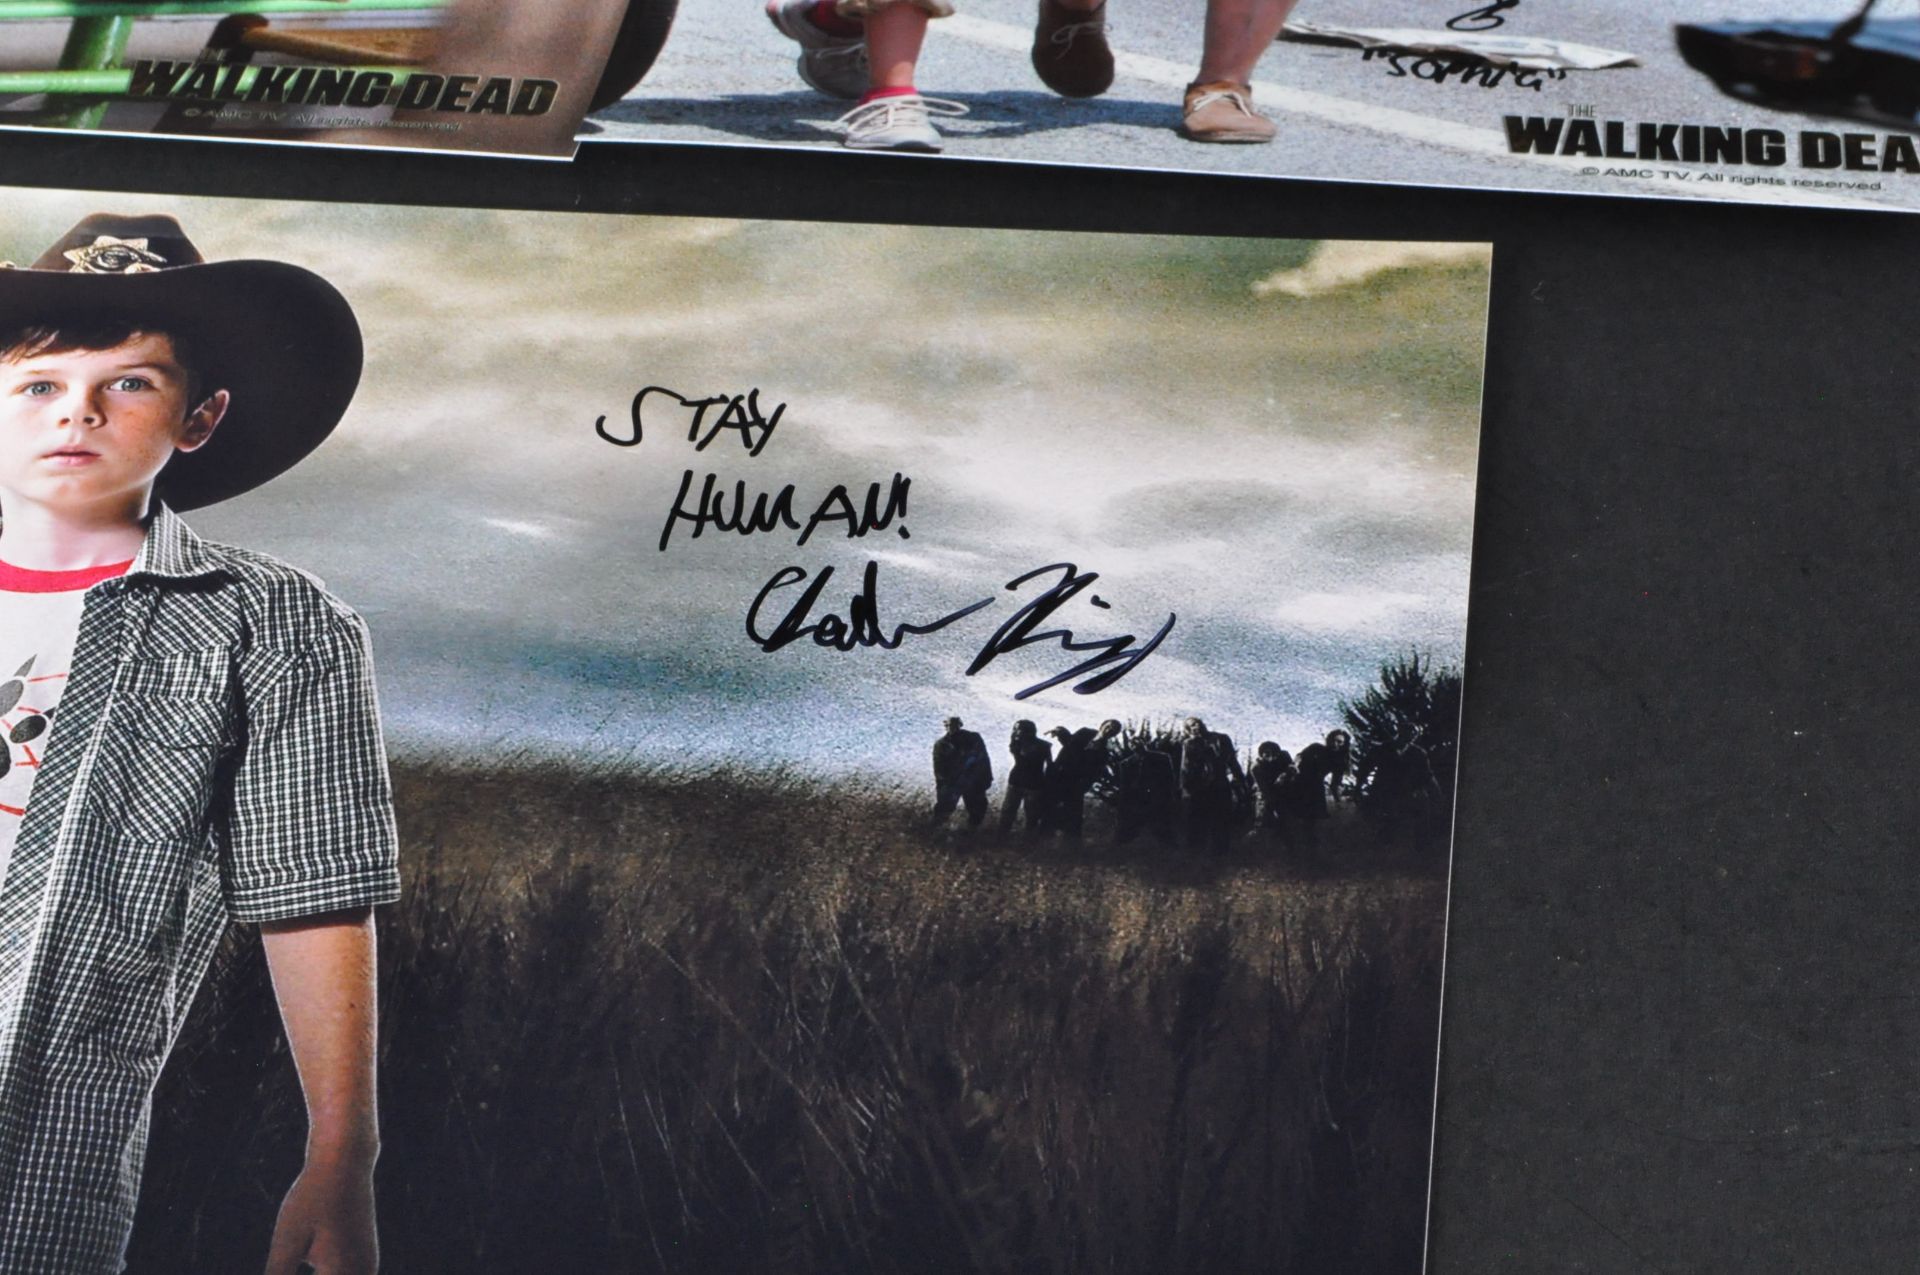 THE WALKING DEAD - COLLECTION OF AUTOGRAPHED 8X10" PHOTOS - Image 4 of 4